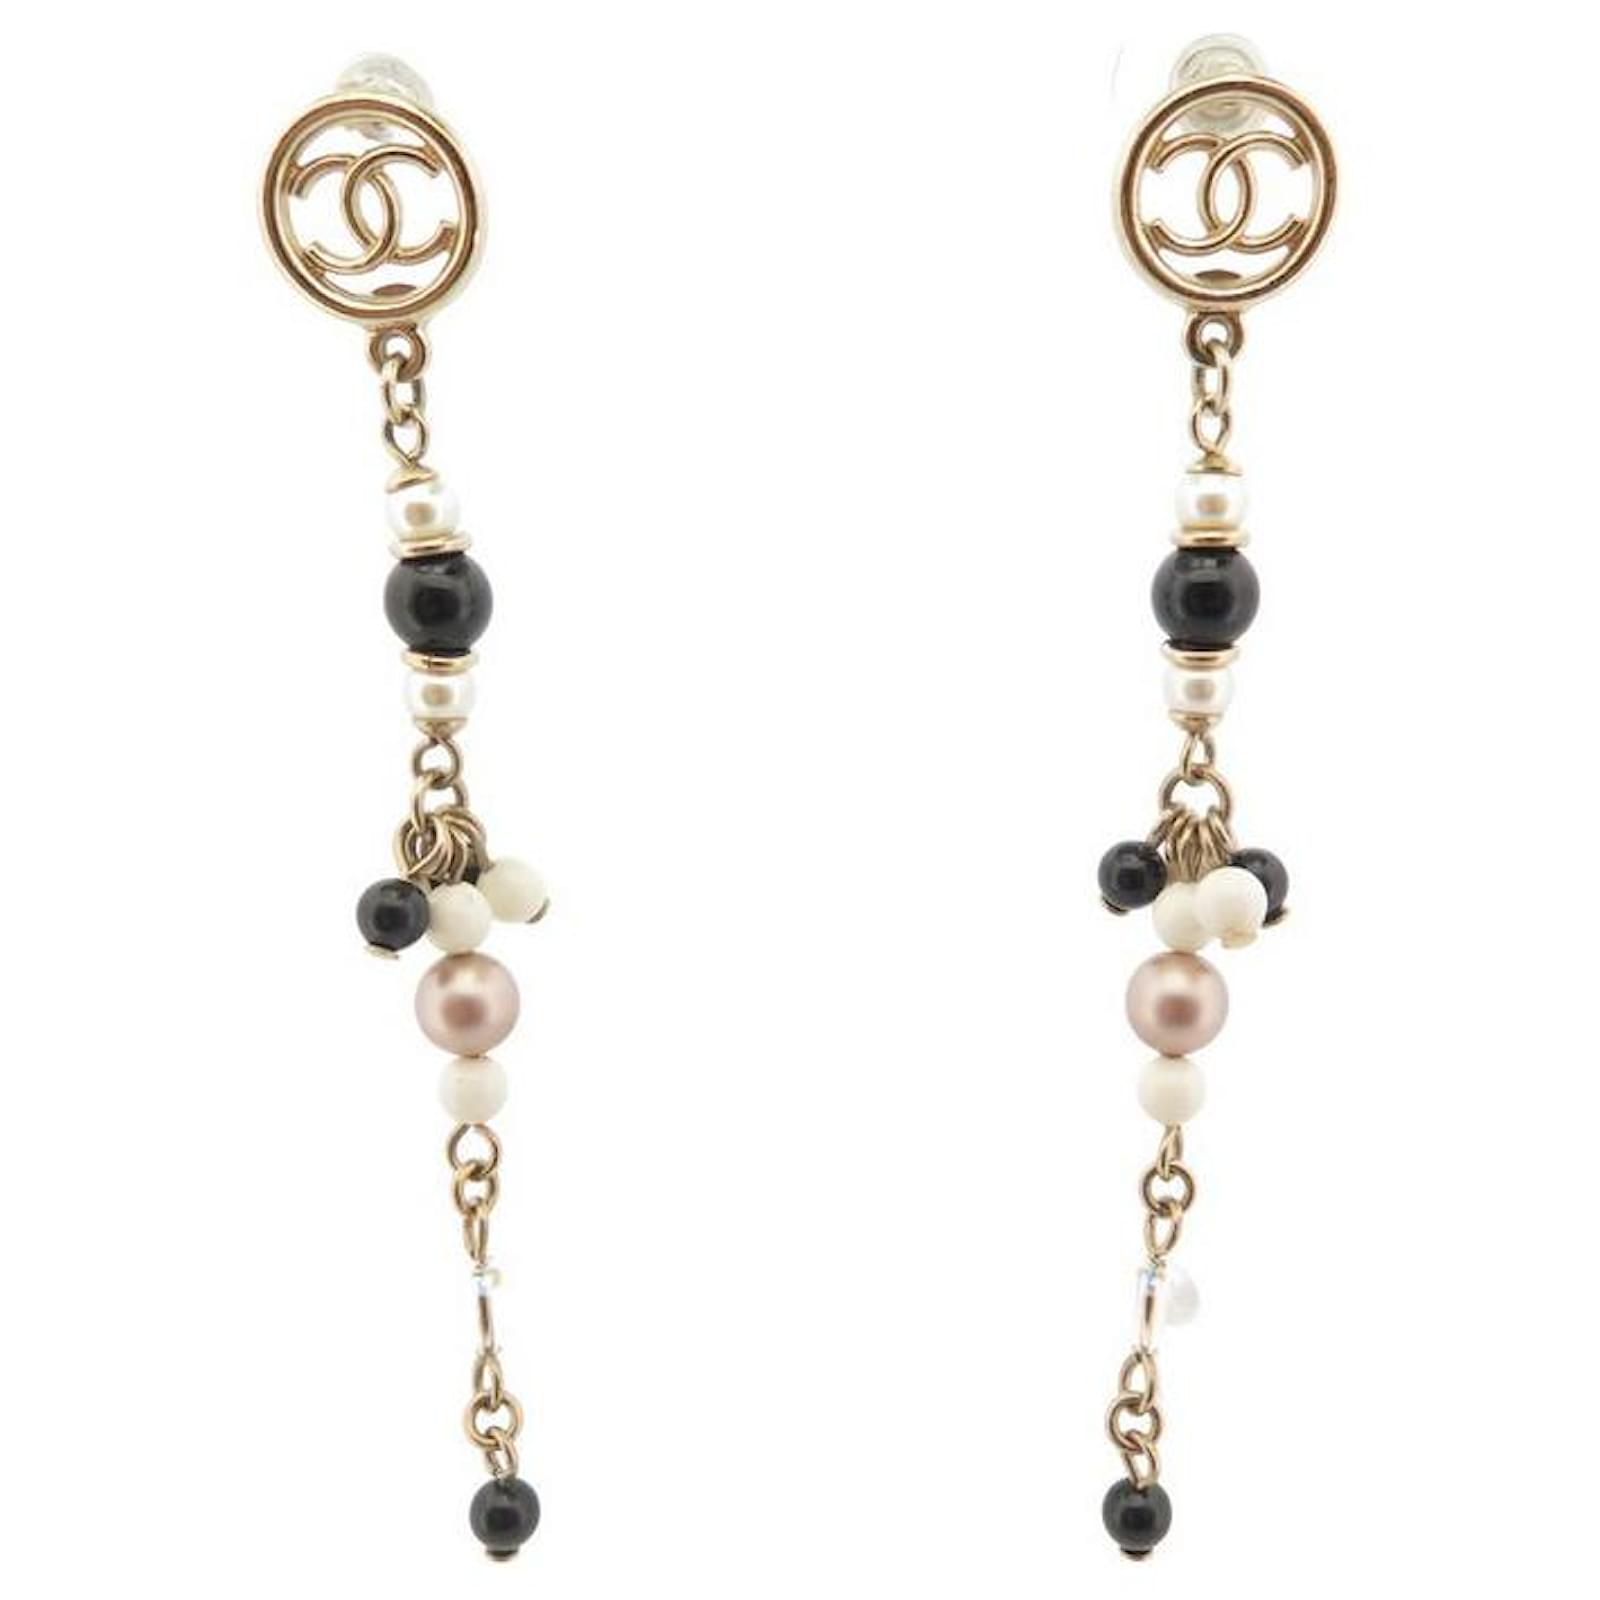 Hoop earrings - Metal, glass pearls & strass, gold, pearly white, black &  crystal — Fashion | CHANEL